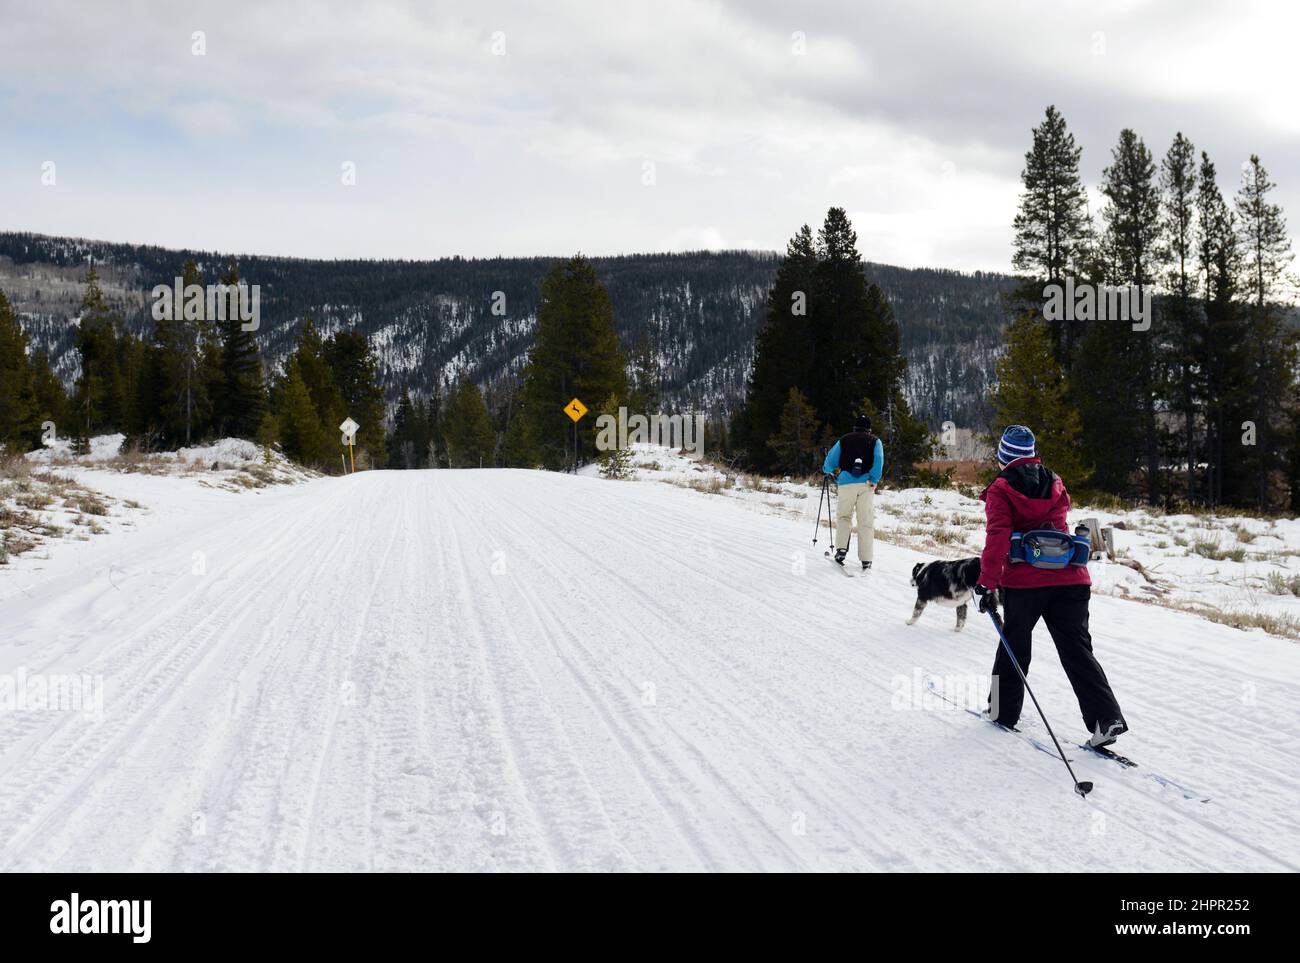 Cross country skiing on route 150 along the Provo river in the Mirror lake area in Kamas, Utah, USA. Stock Photo